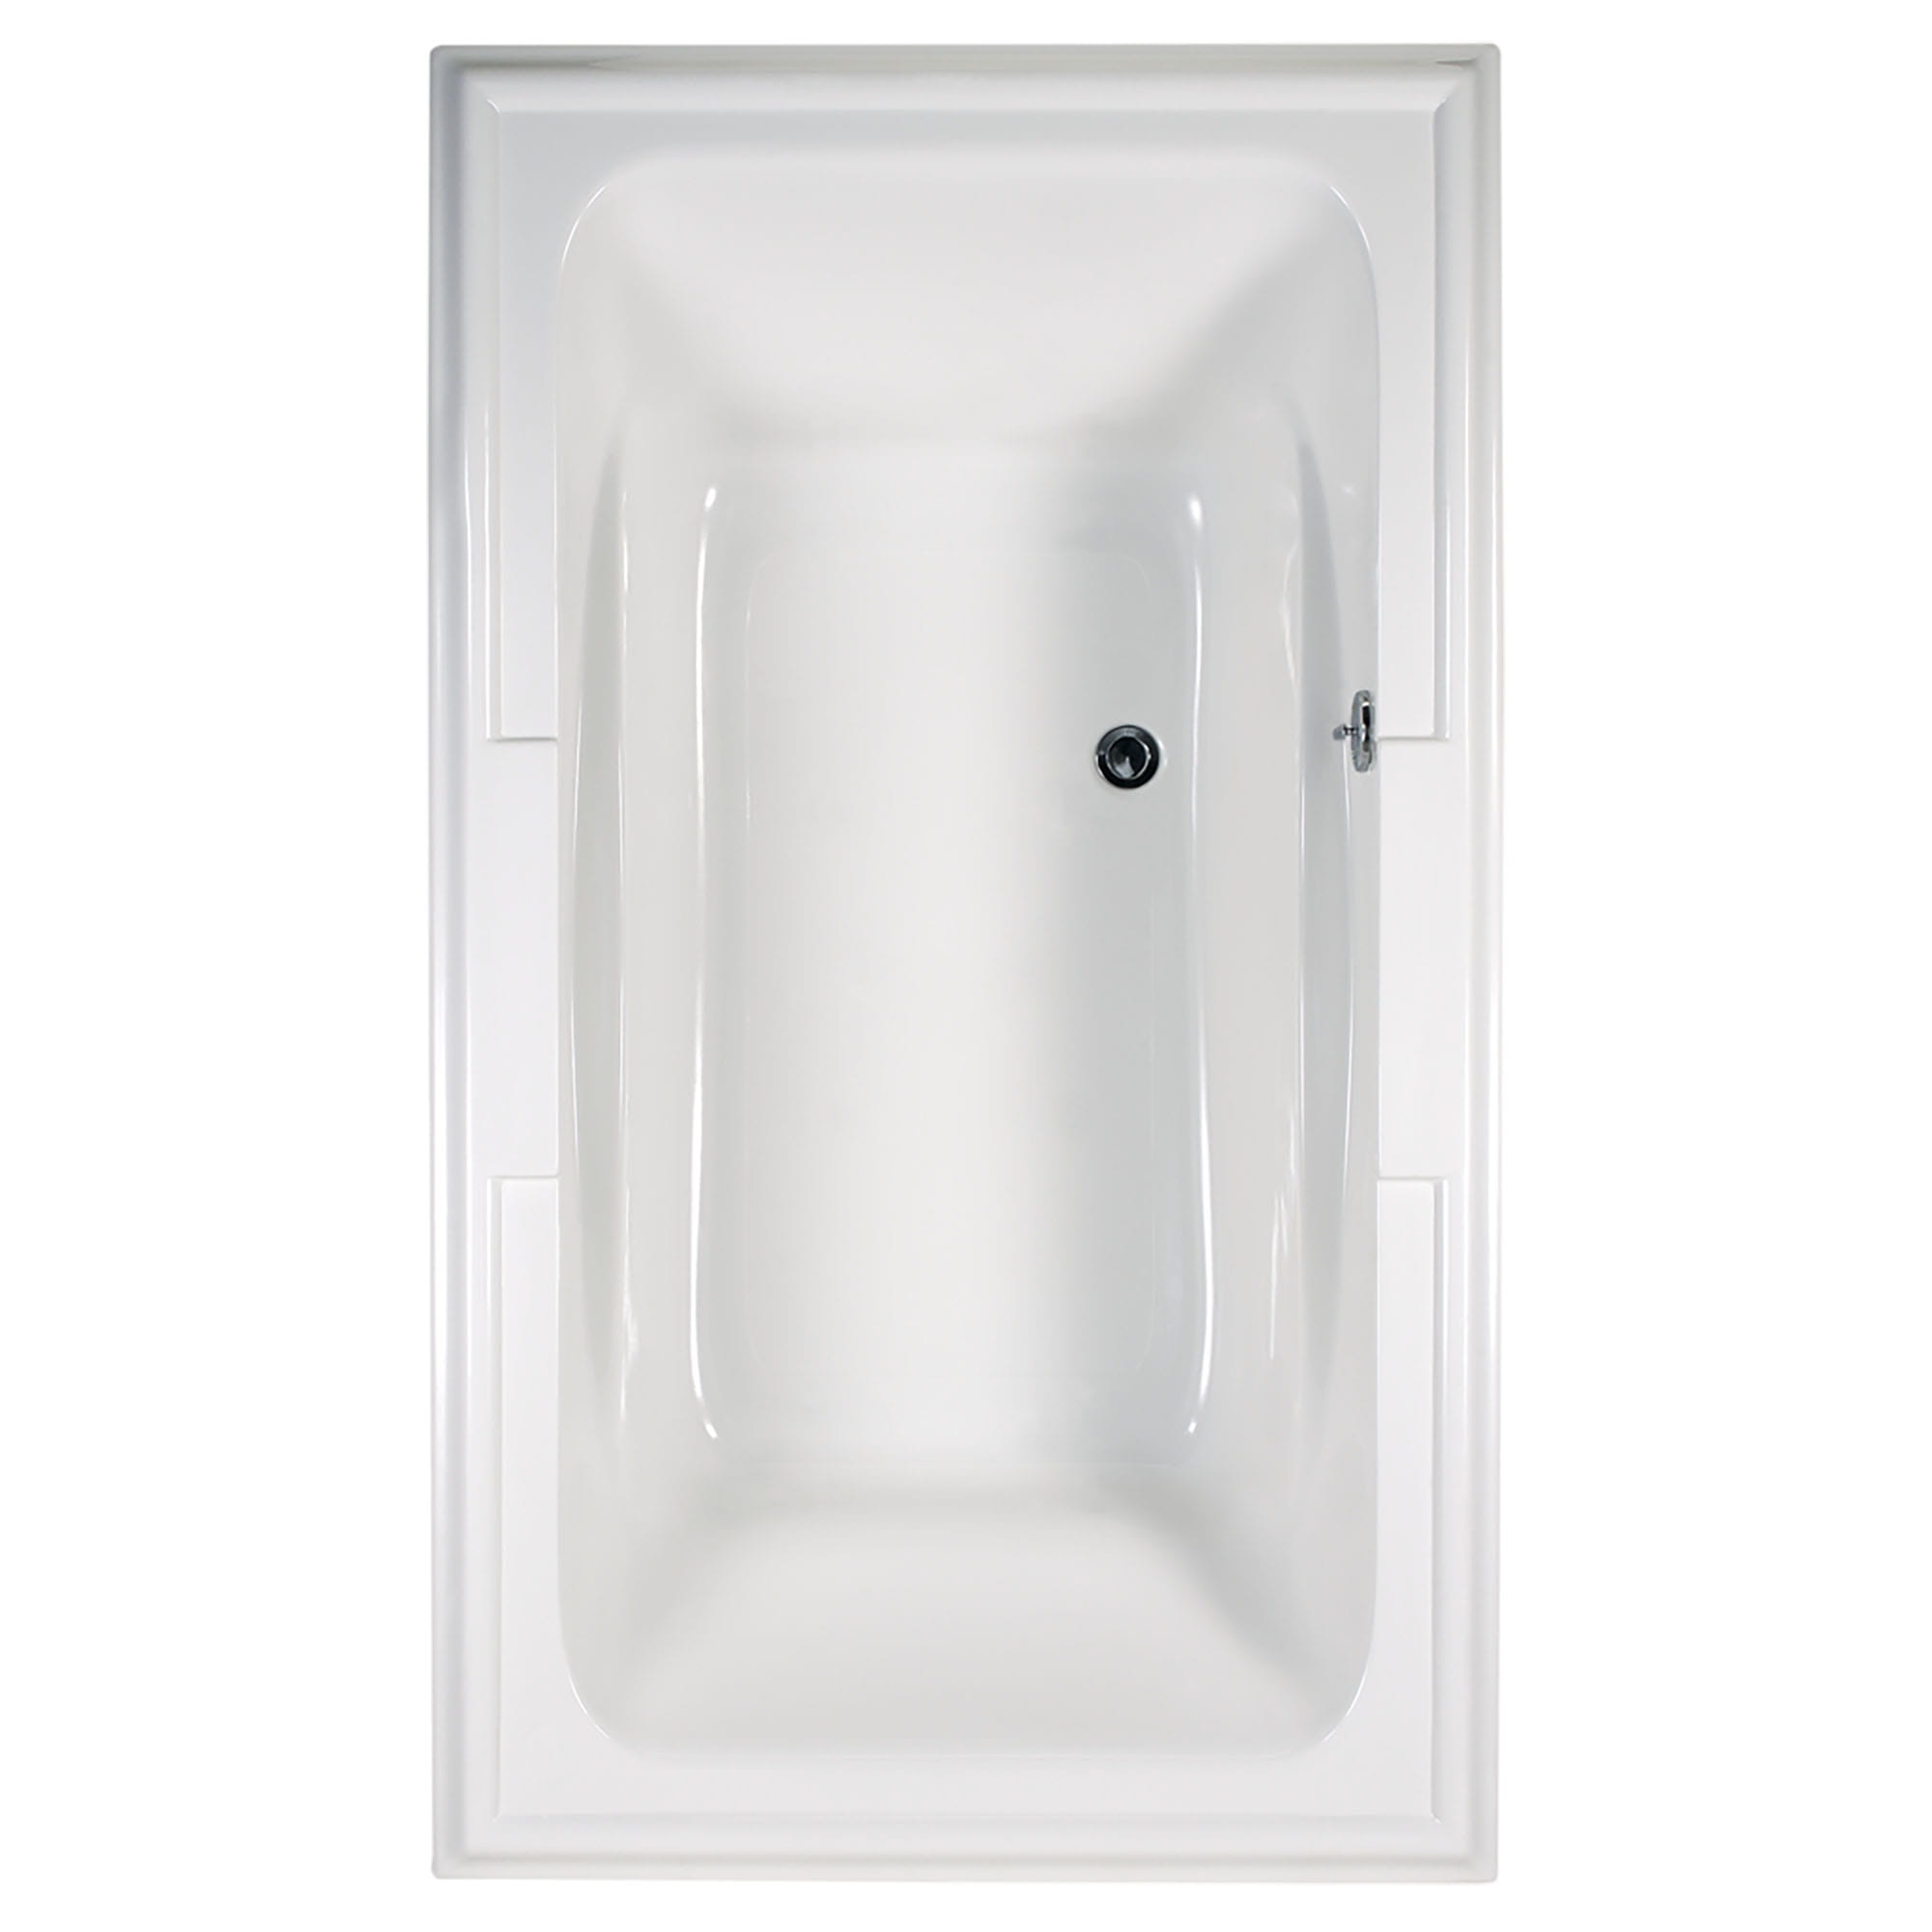 Town Square® 72 x 42-Inch Drop-In Bathtub With EcoSilent® EverClean® Hydromassage System